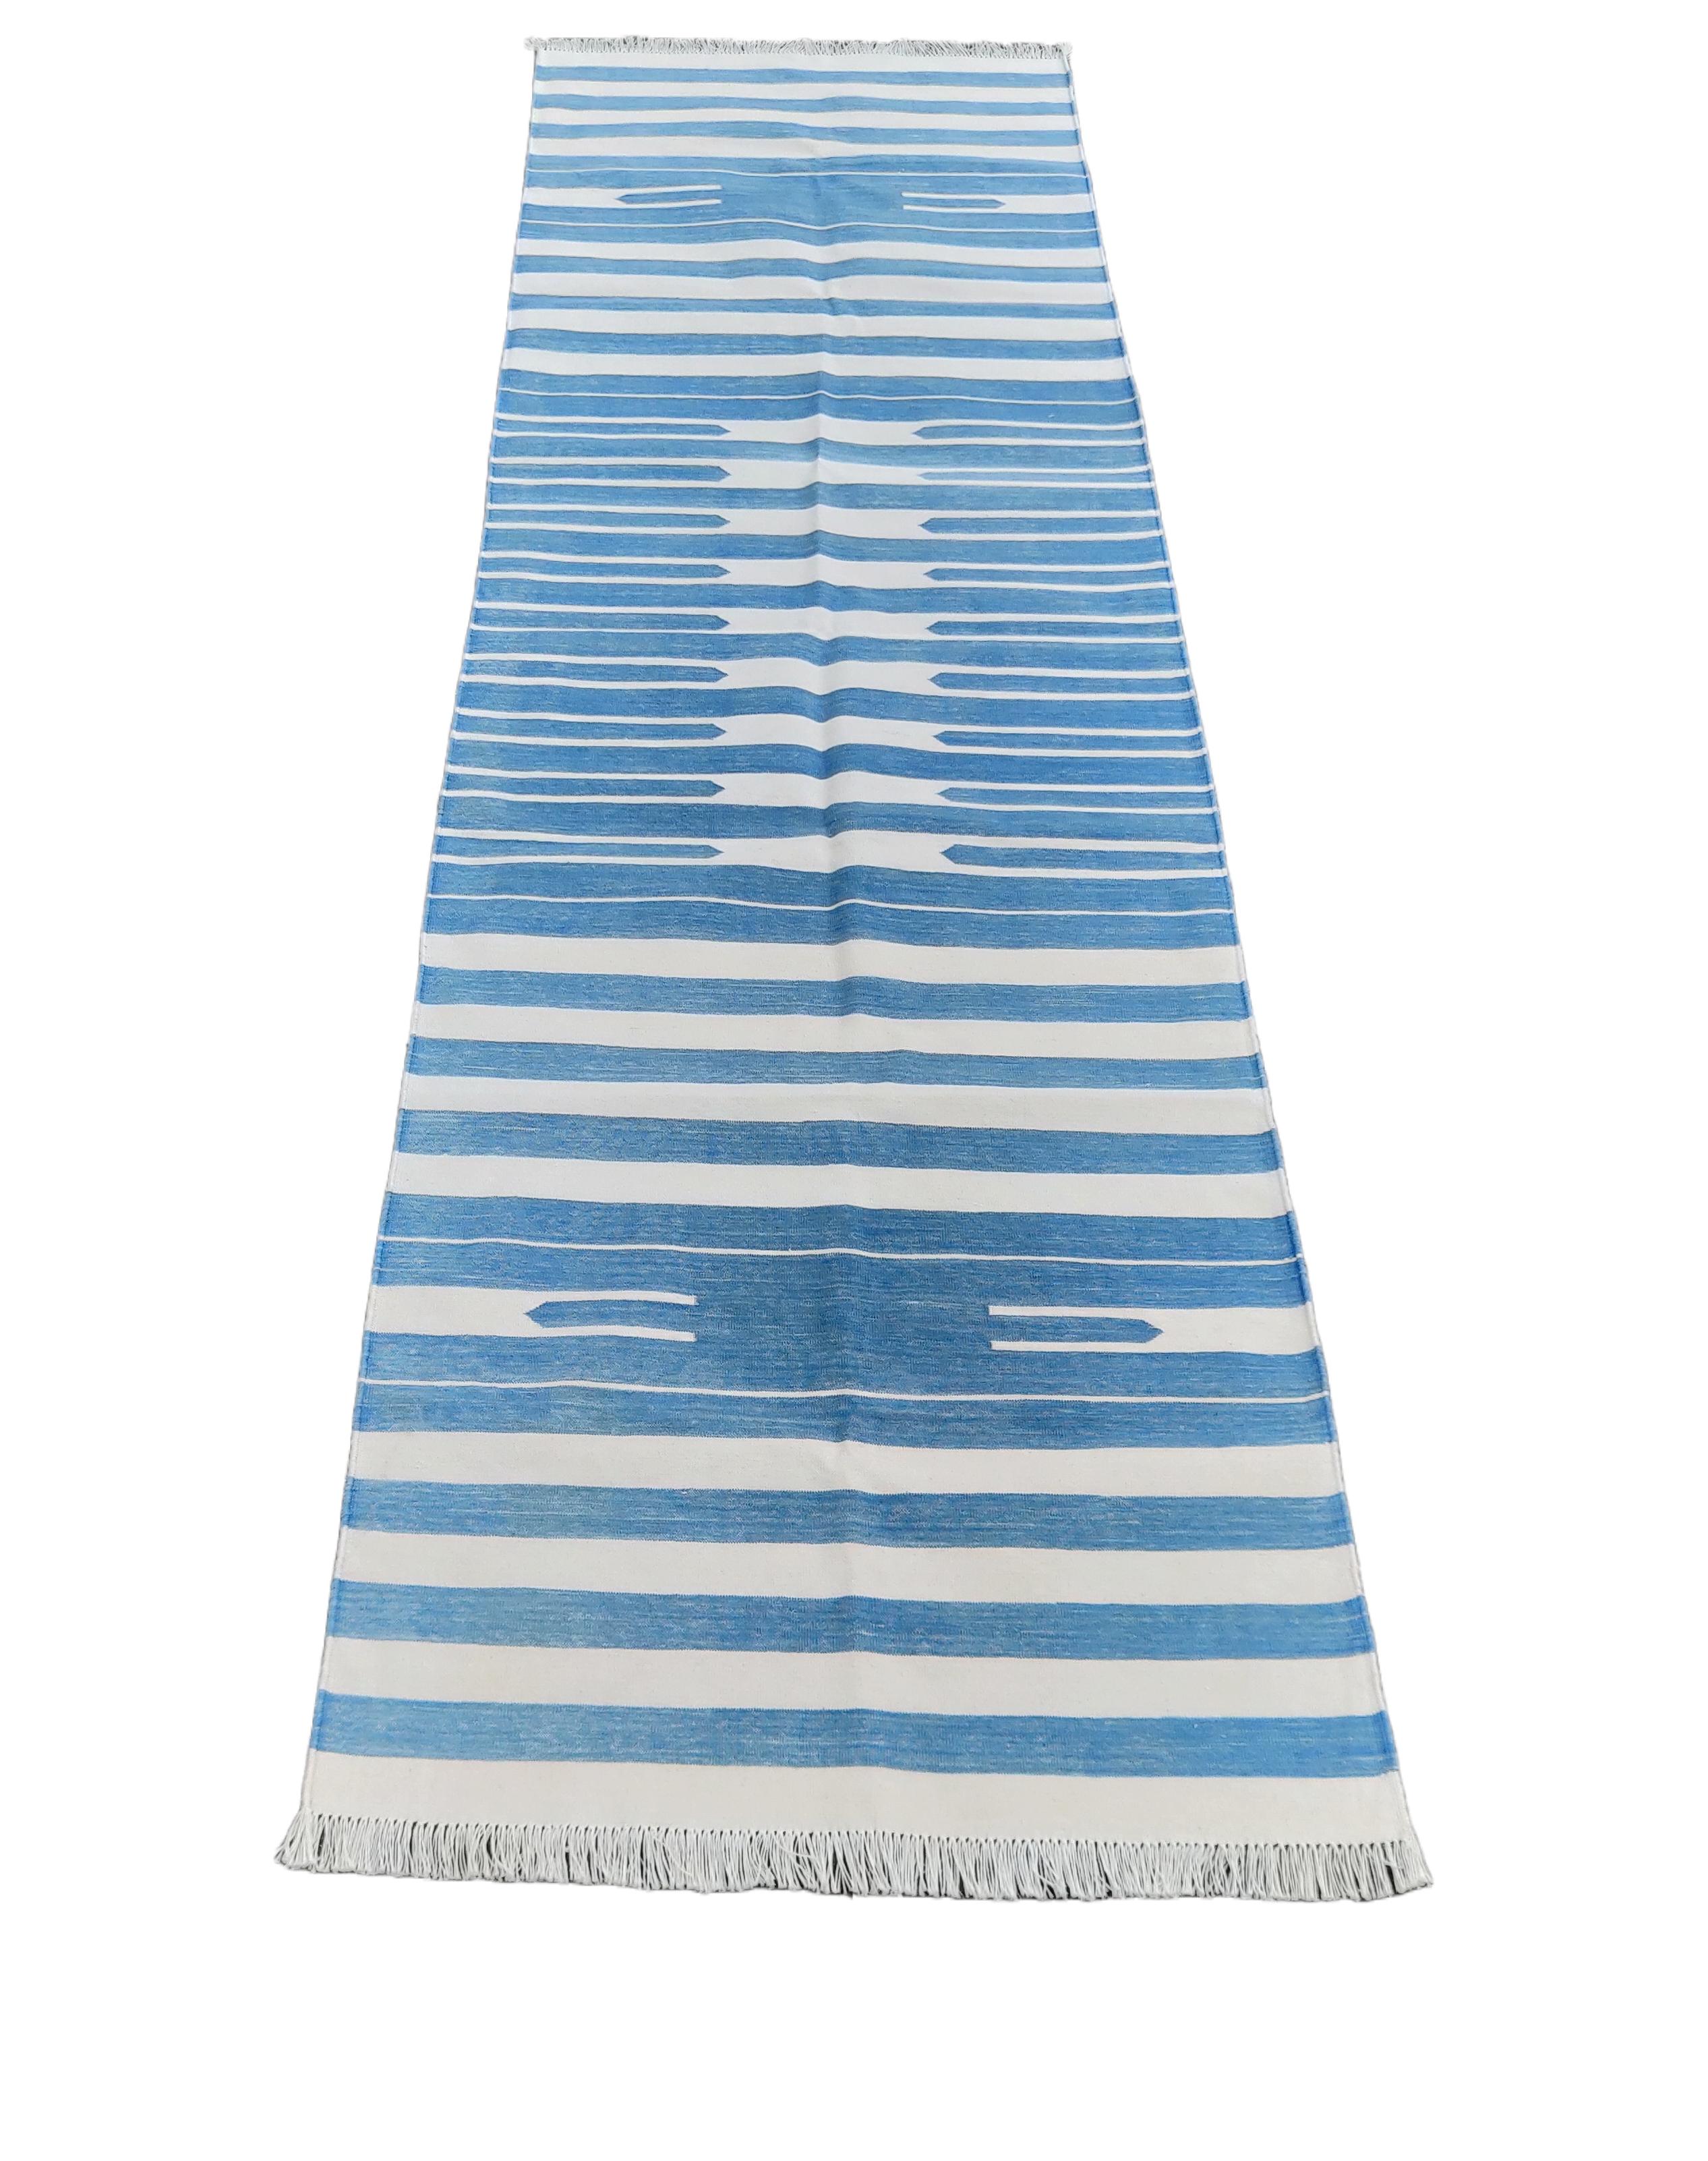 Mid-Century Modern Handmade Cotton Area Flat Weave Runner, 3x8 Blue And White Striped Dhurrie Rug For Sale